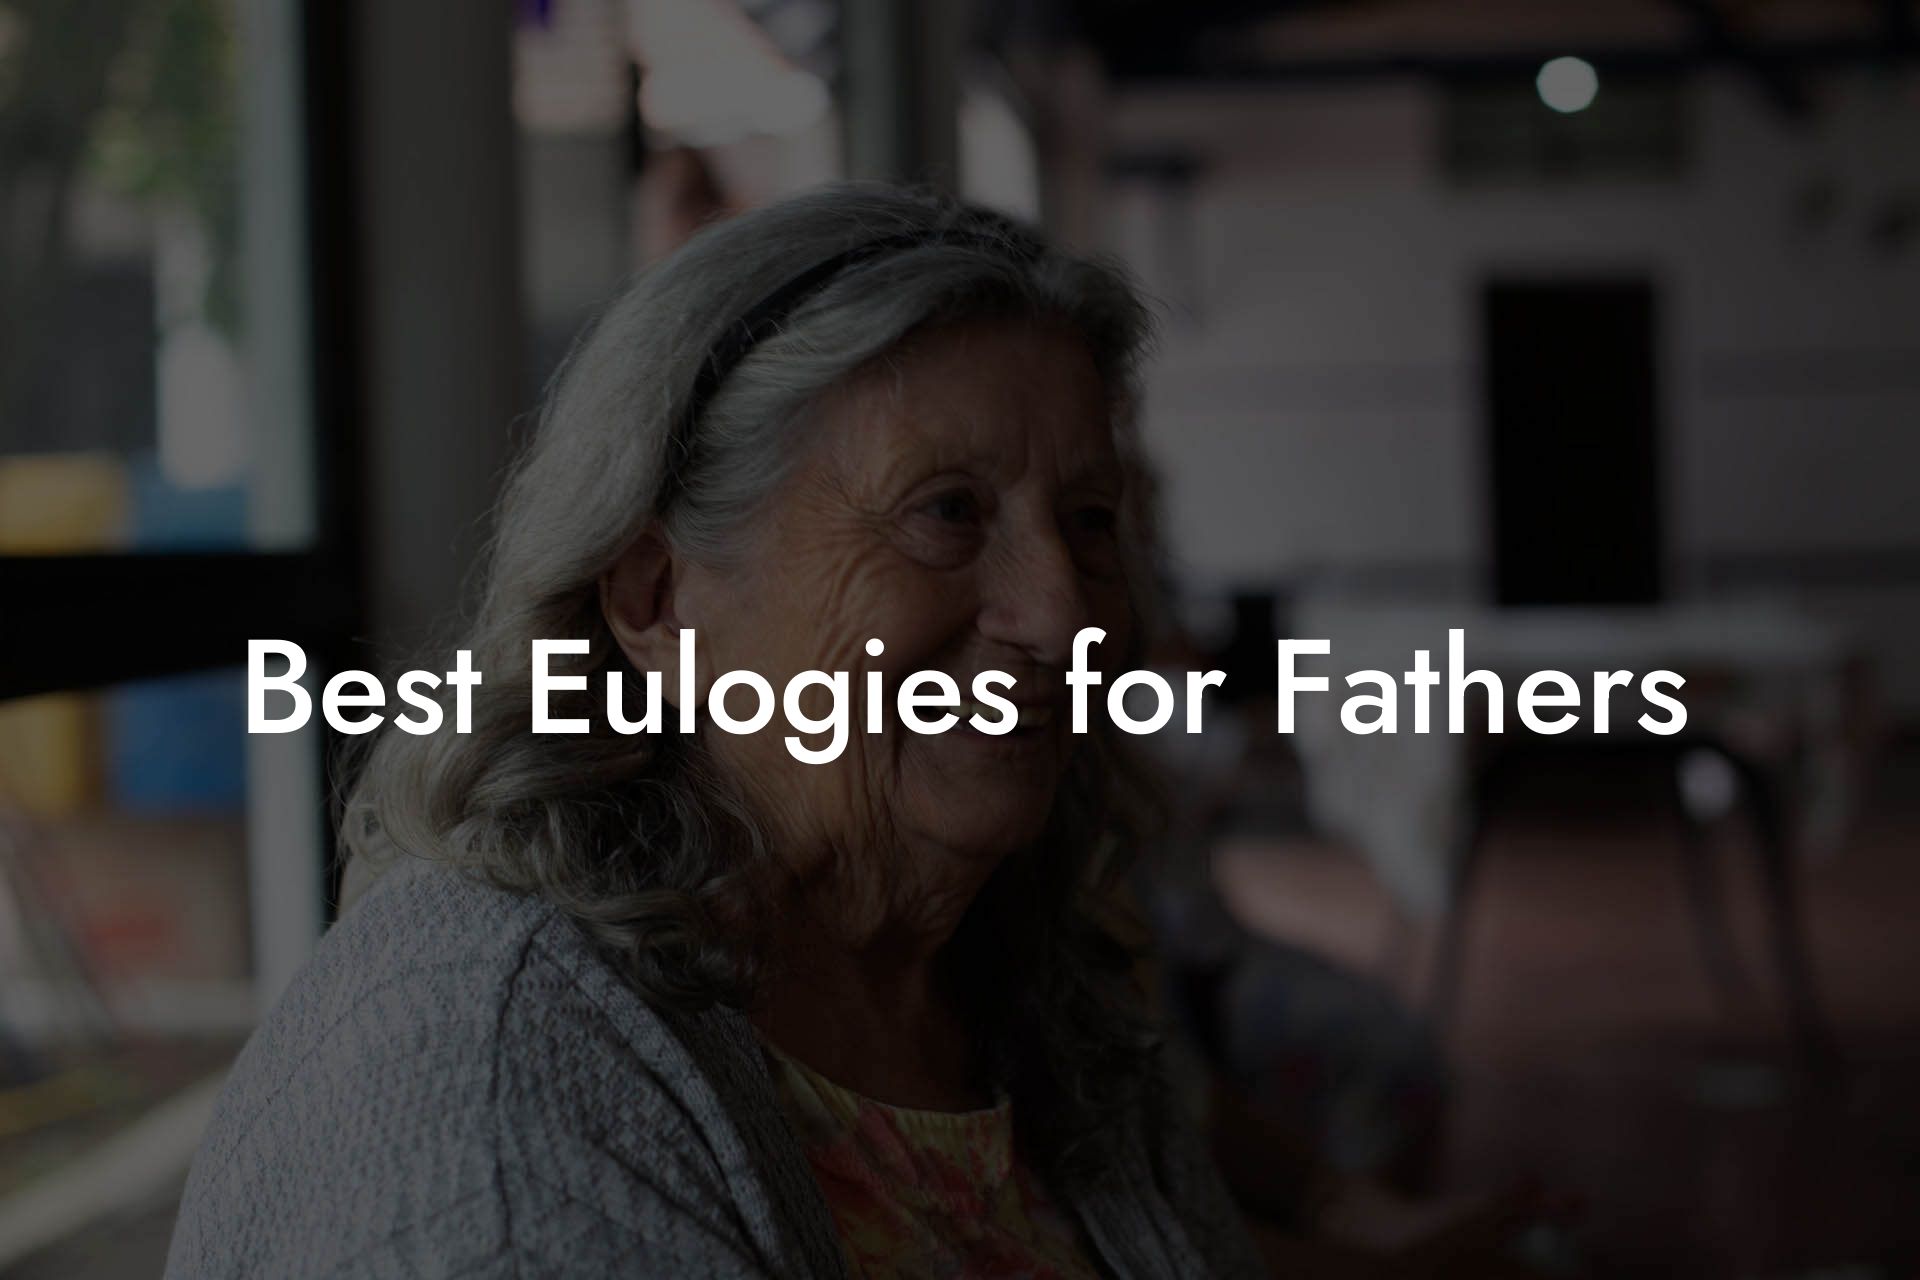 Best Eulogies for Fathers